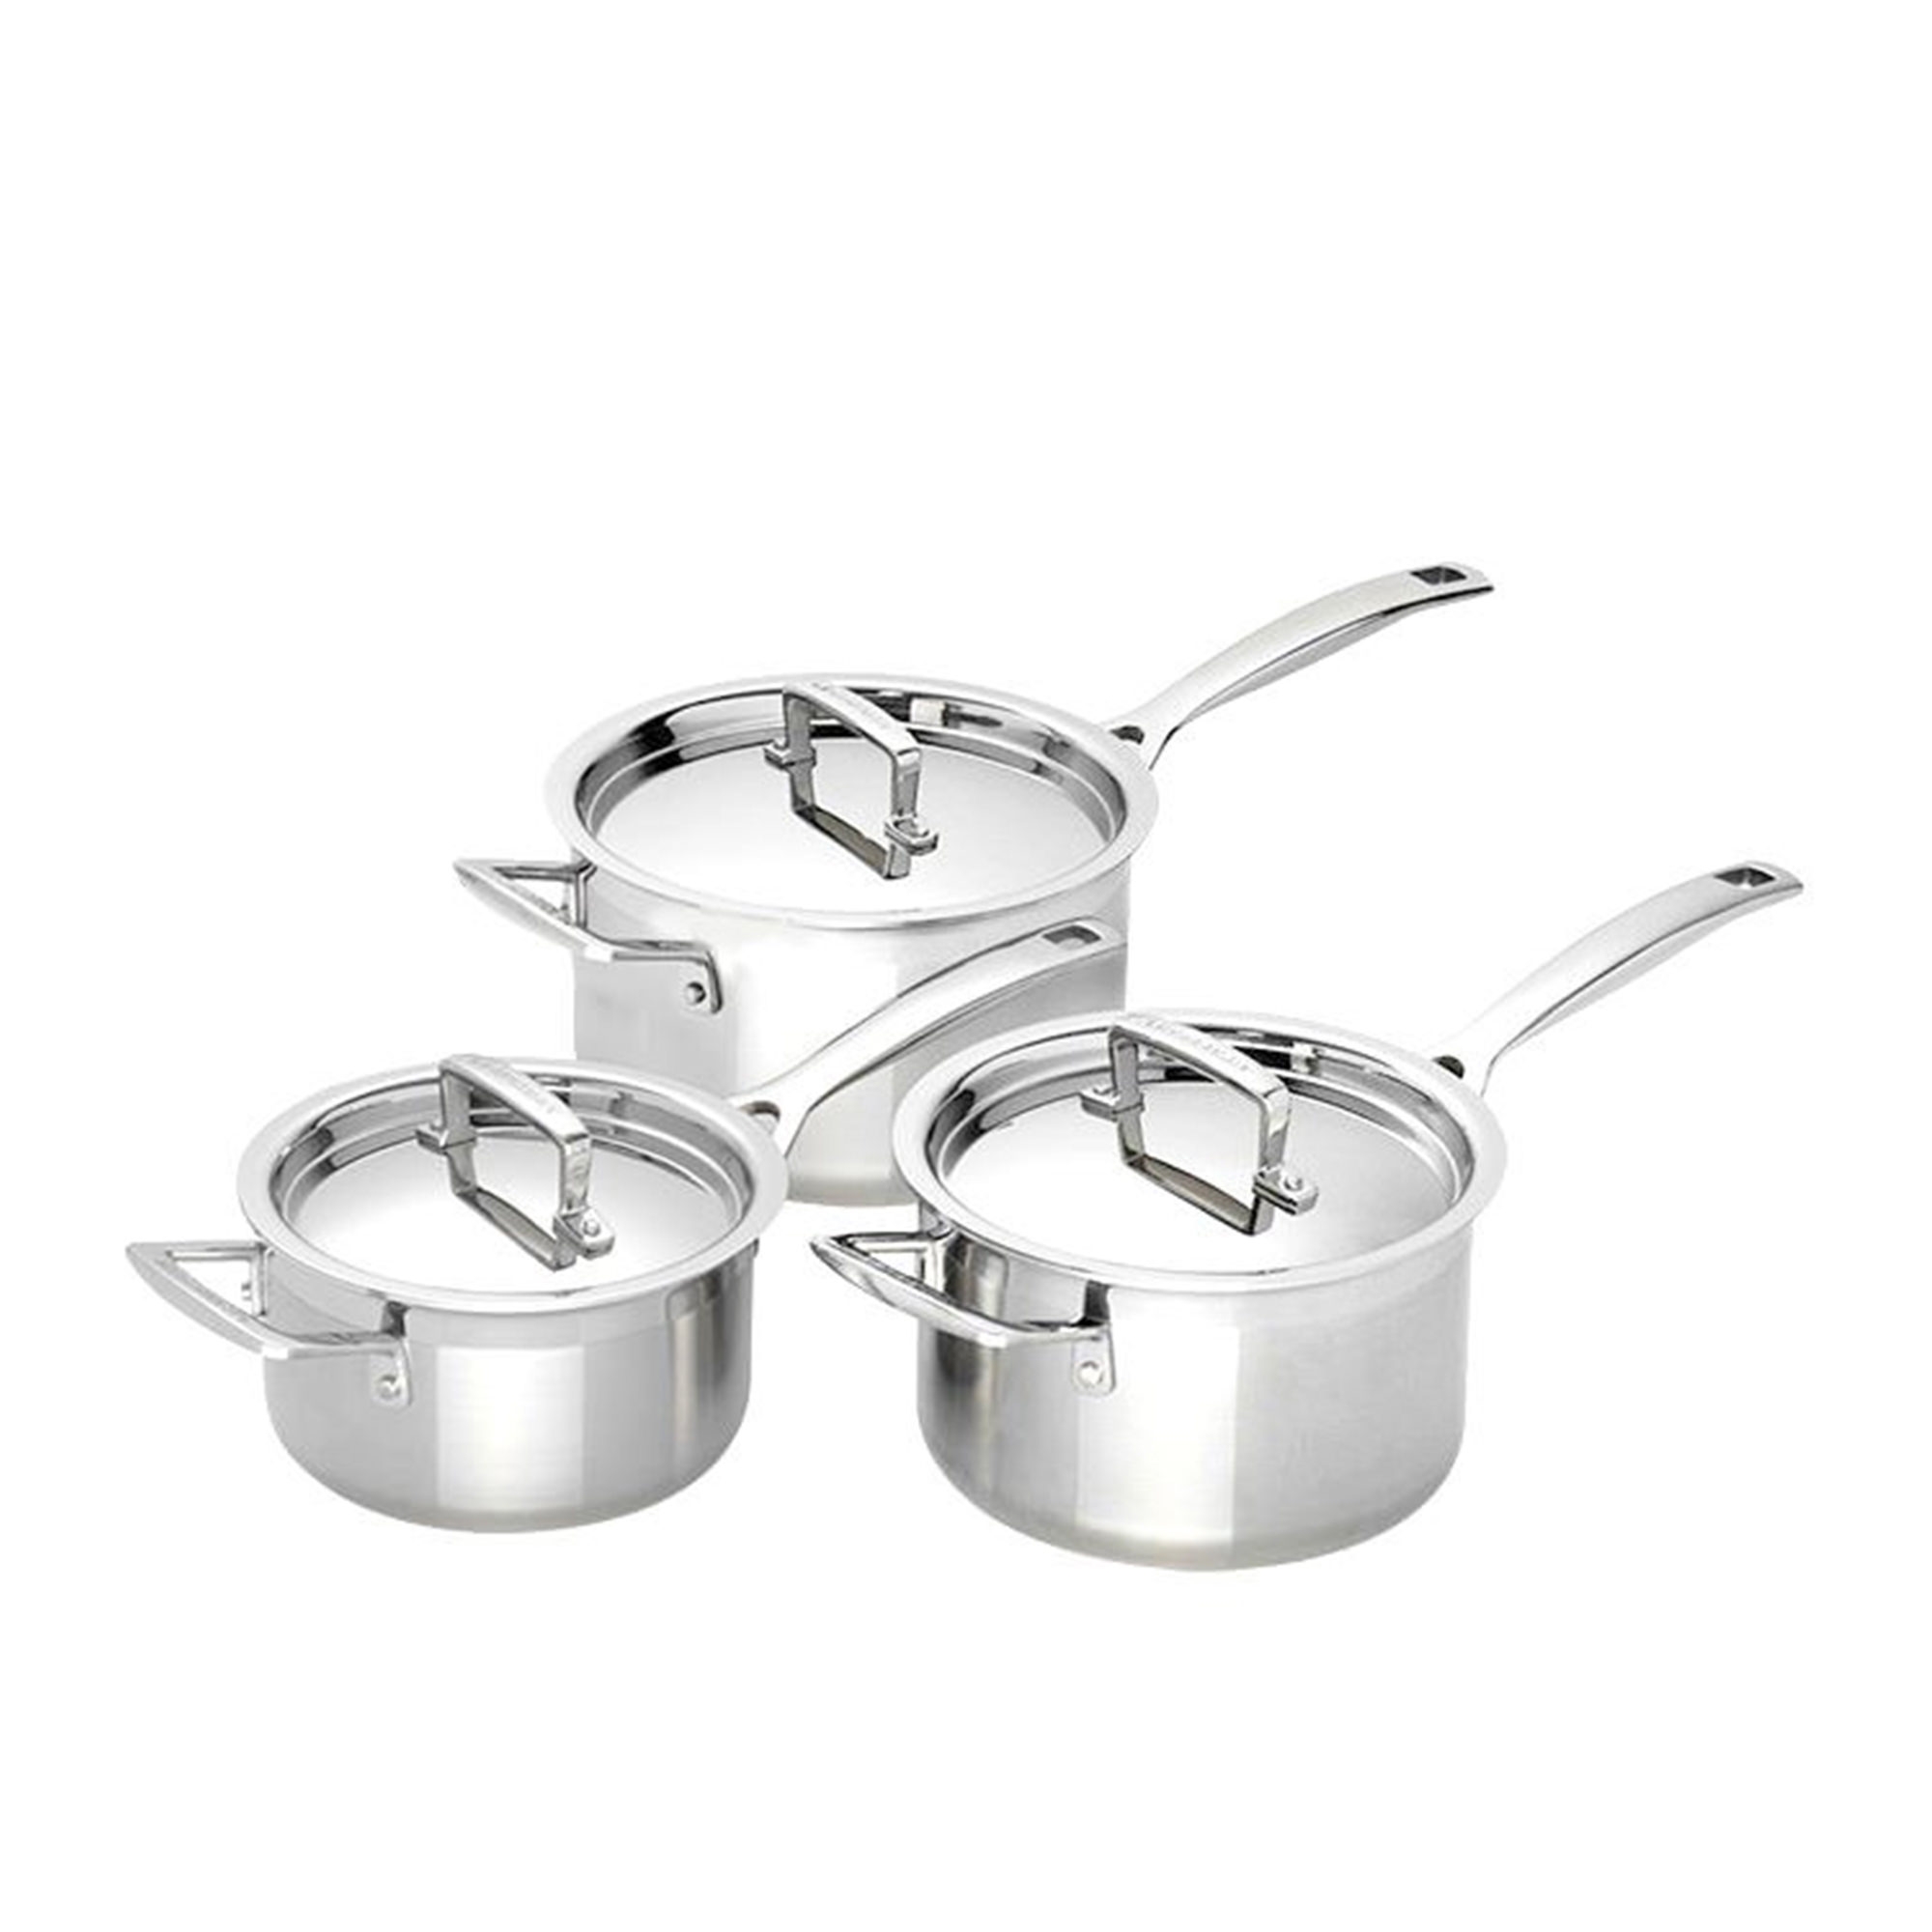 Le Creuset 3-Ply 3pc Stainless Steel Saucepan Set Image 1